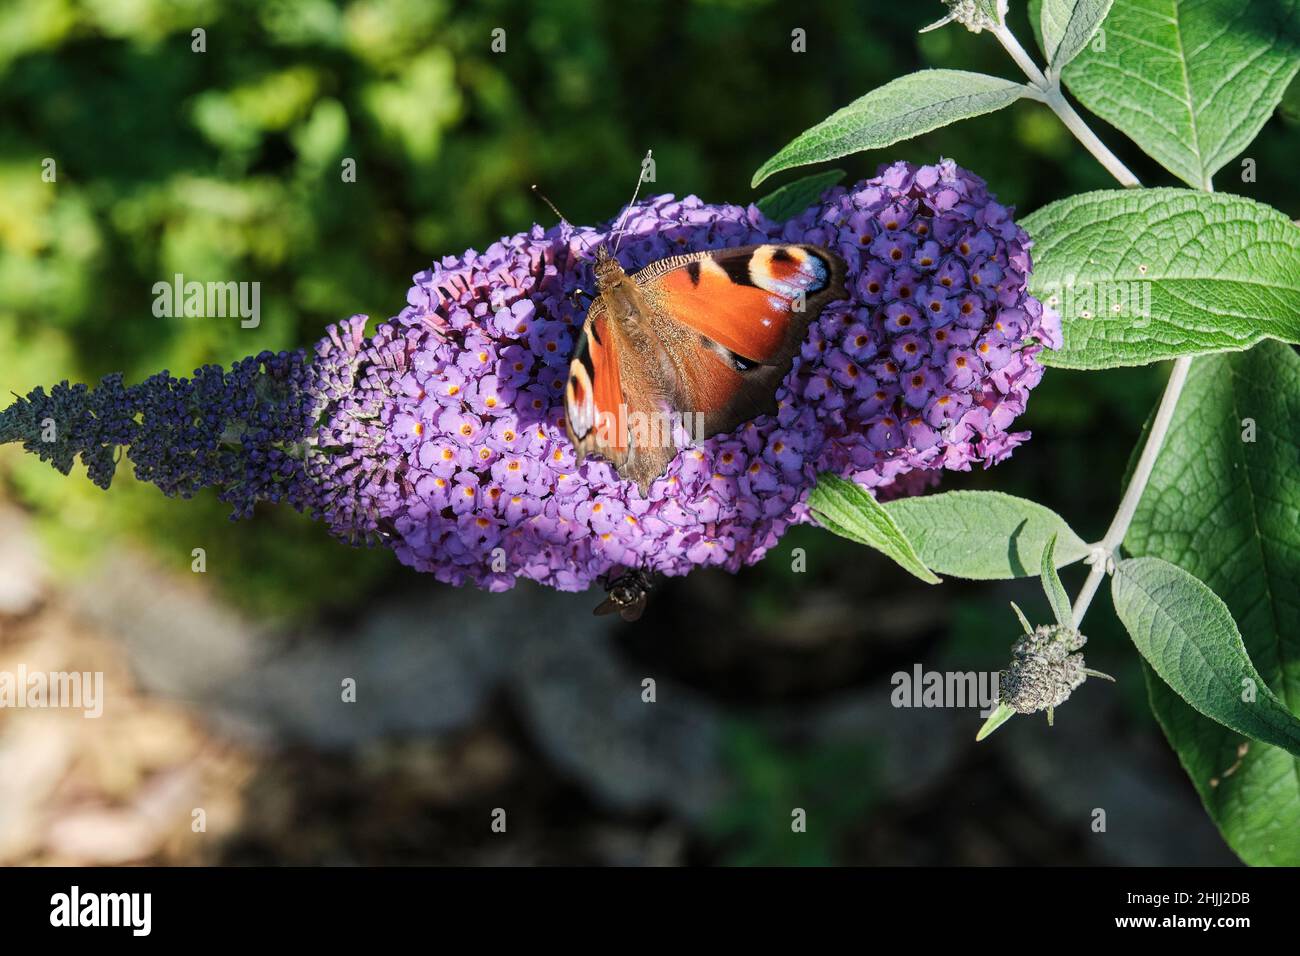 Aglais io, the European peacock, commonly known peacock butterfly, feeding on summer lilac, butterfly bush or Buddleja davidii on a sunny day. Stock Photo